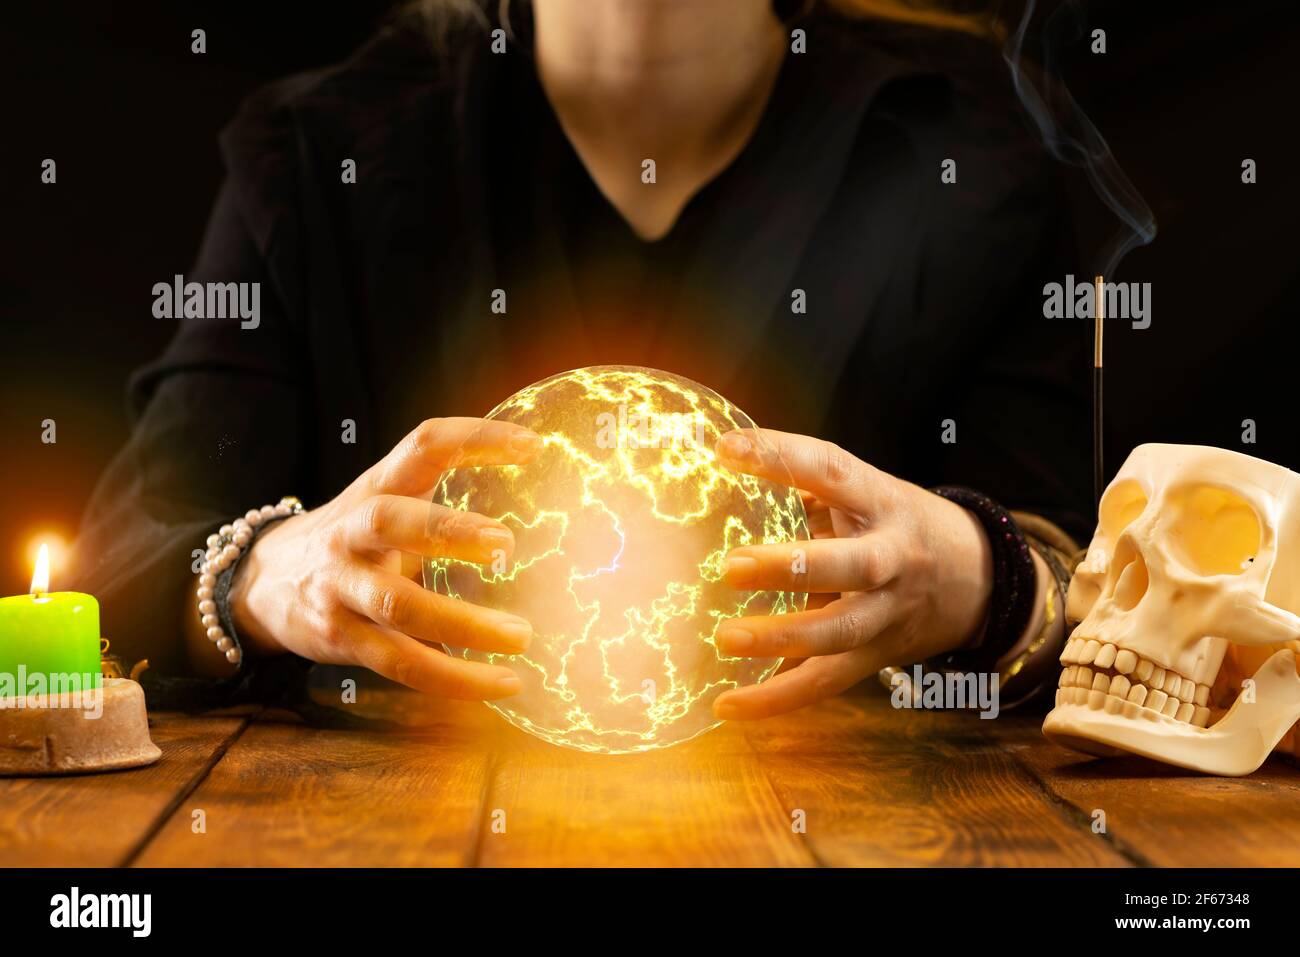 A fortune-teller or oracle with objects for fortune-telling holds a fireball in his hands to predict the future during the session. Psychic readings a Stock Photo